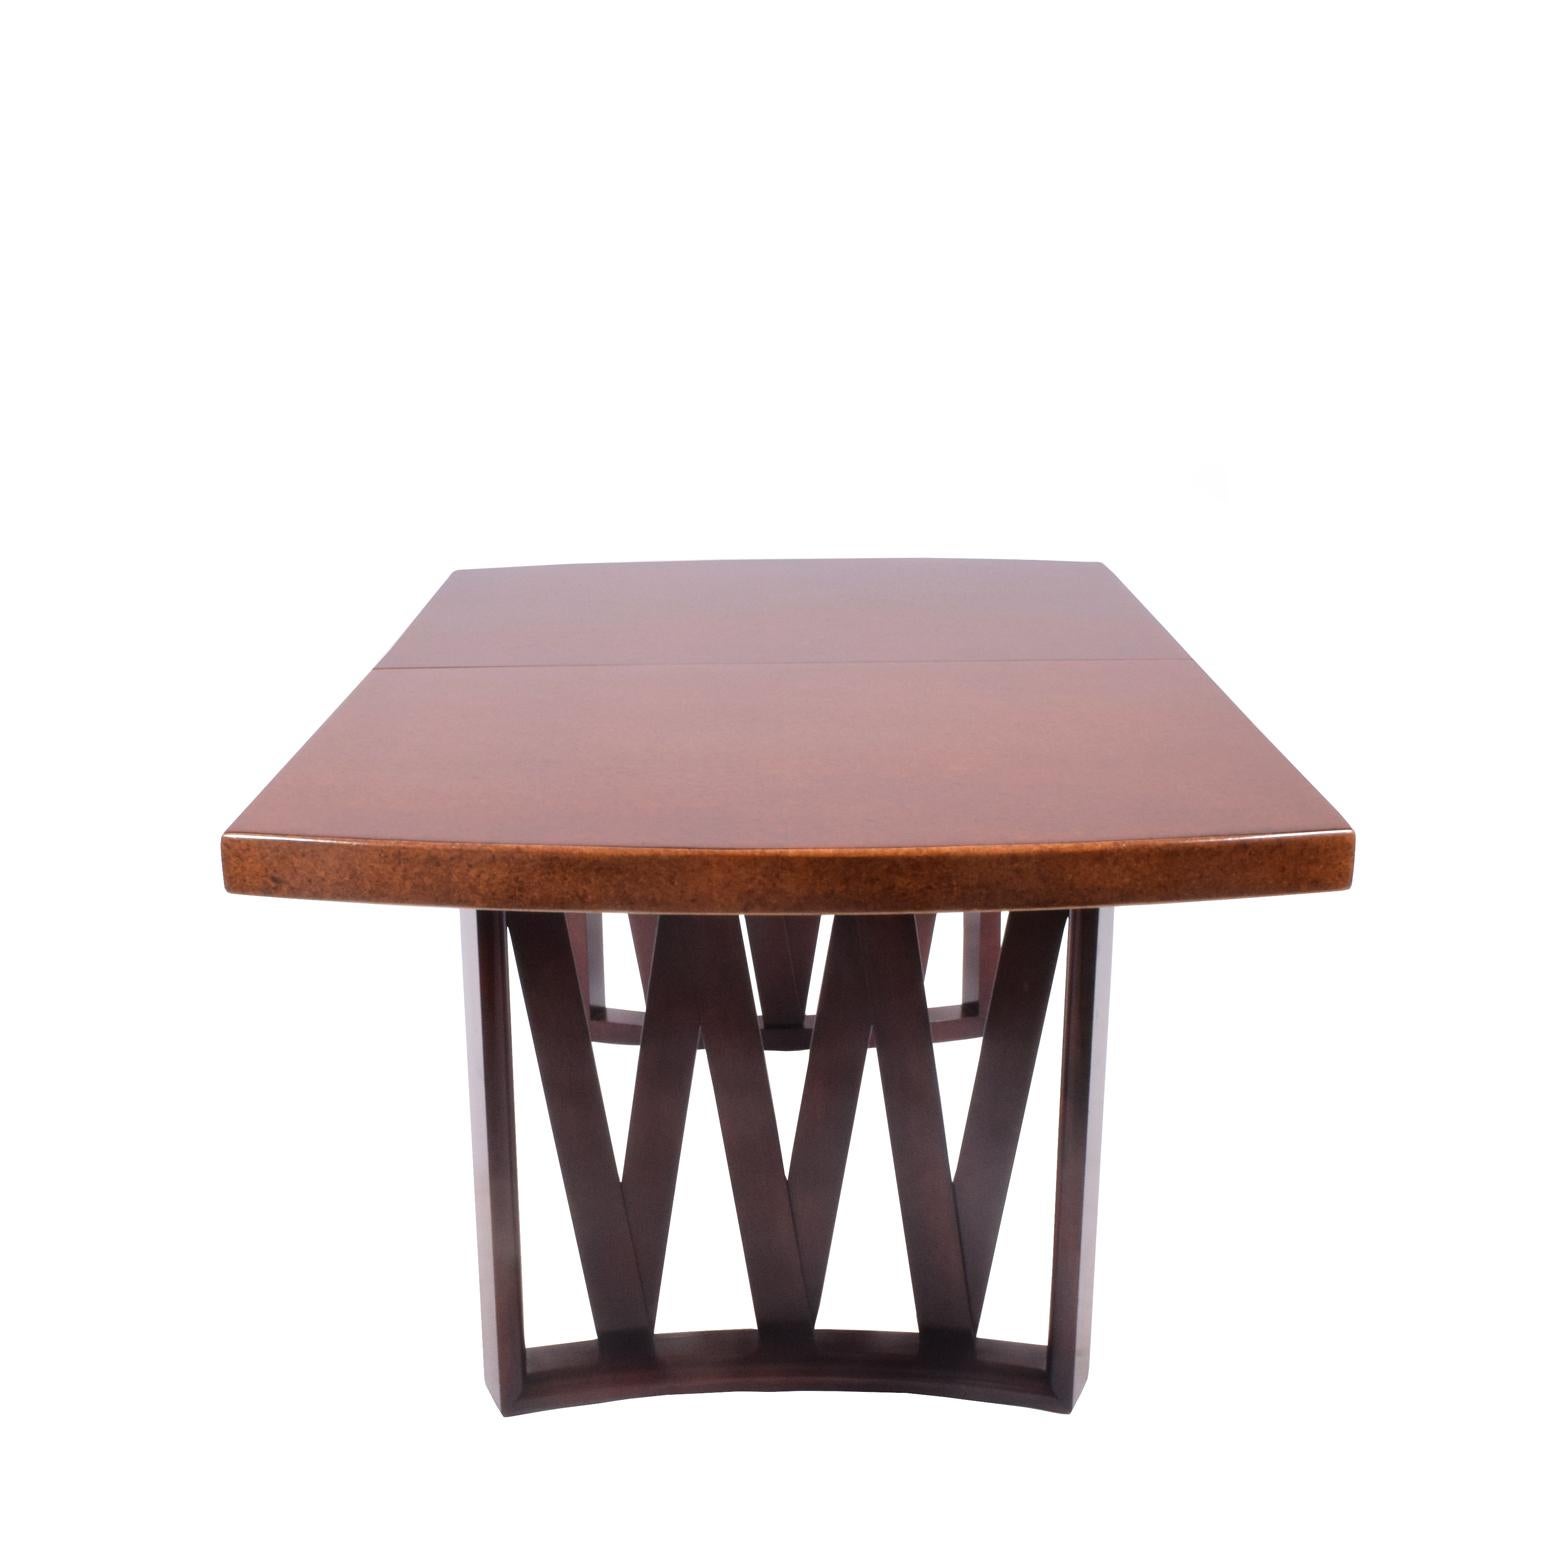 American Paul Frankl Dining Table for Johnson Furniture Co.